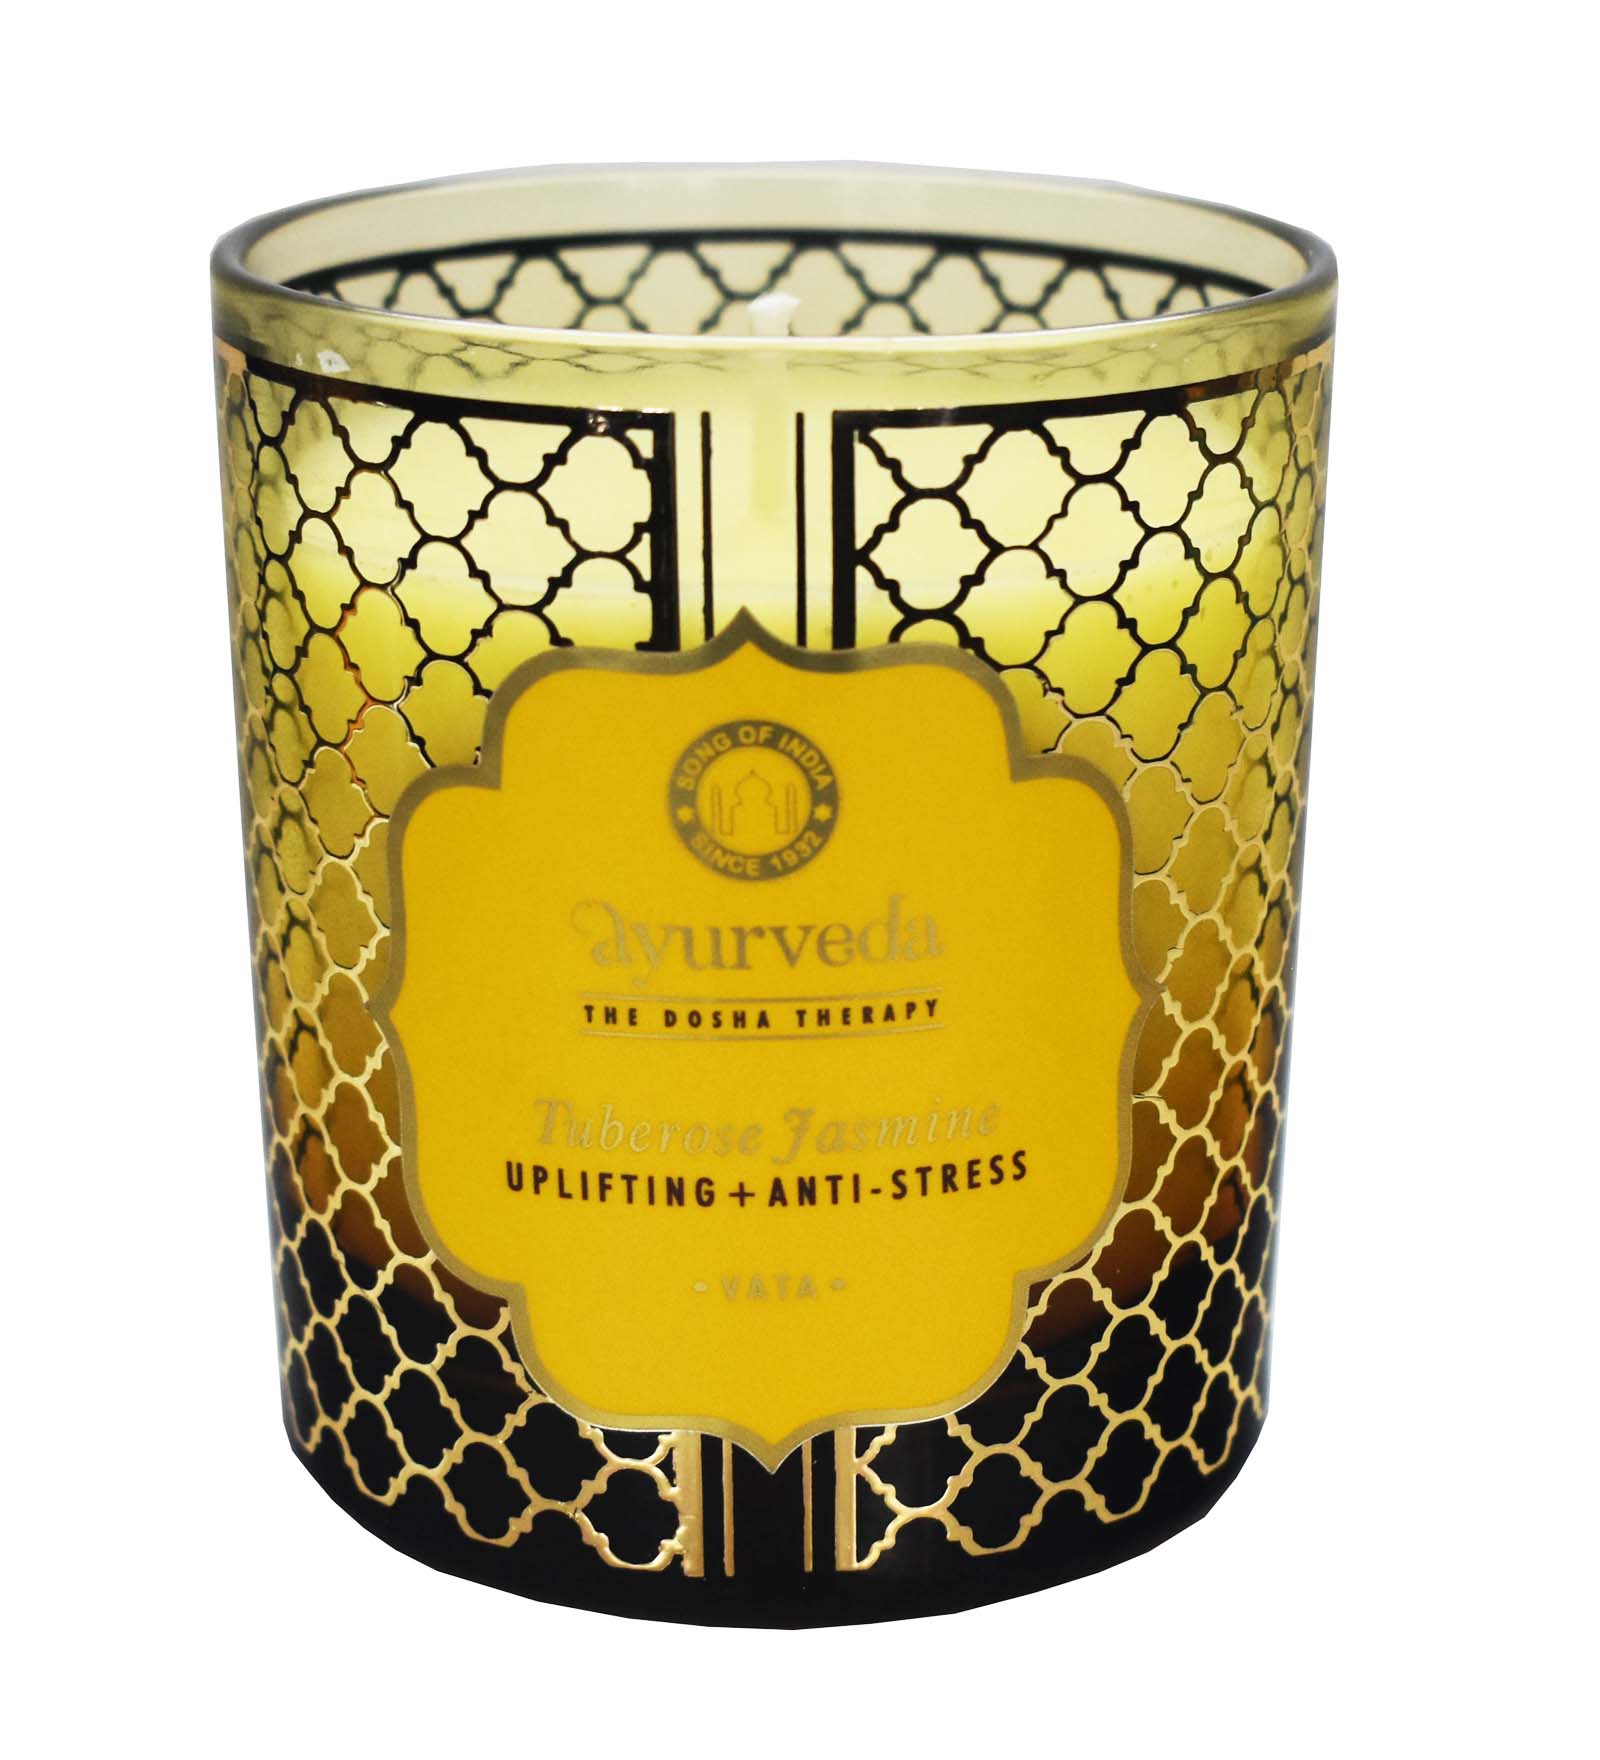 Song of India 200 g. Tuberose Jasmine Luxurious Veda Scented Candle in Brown Colored Glass Jar